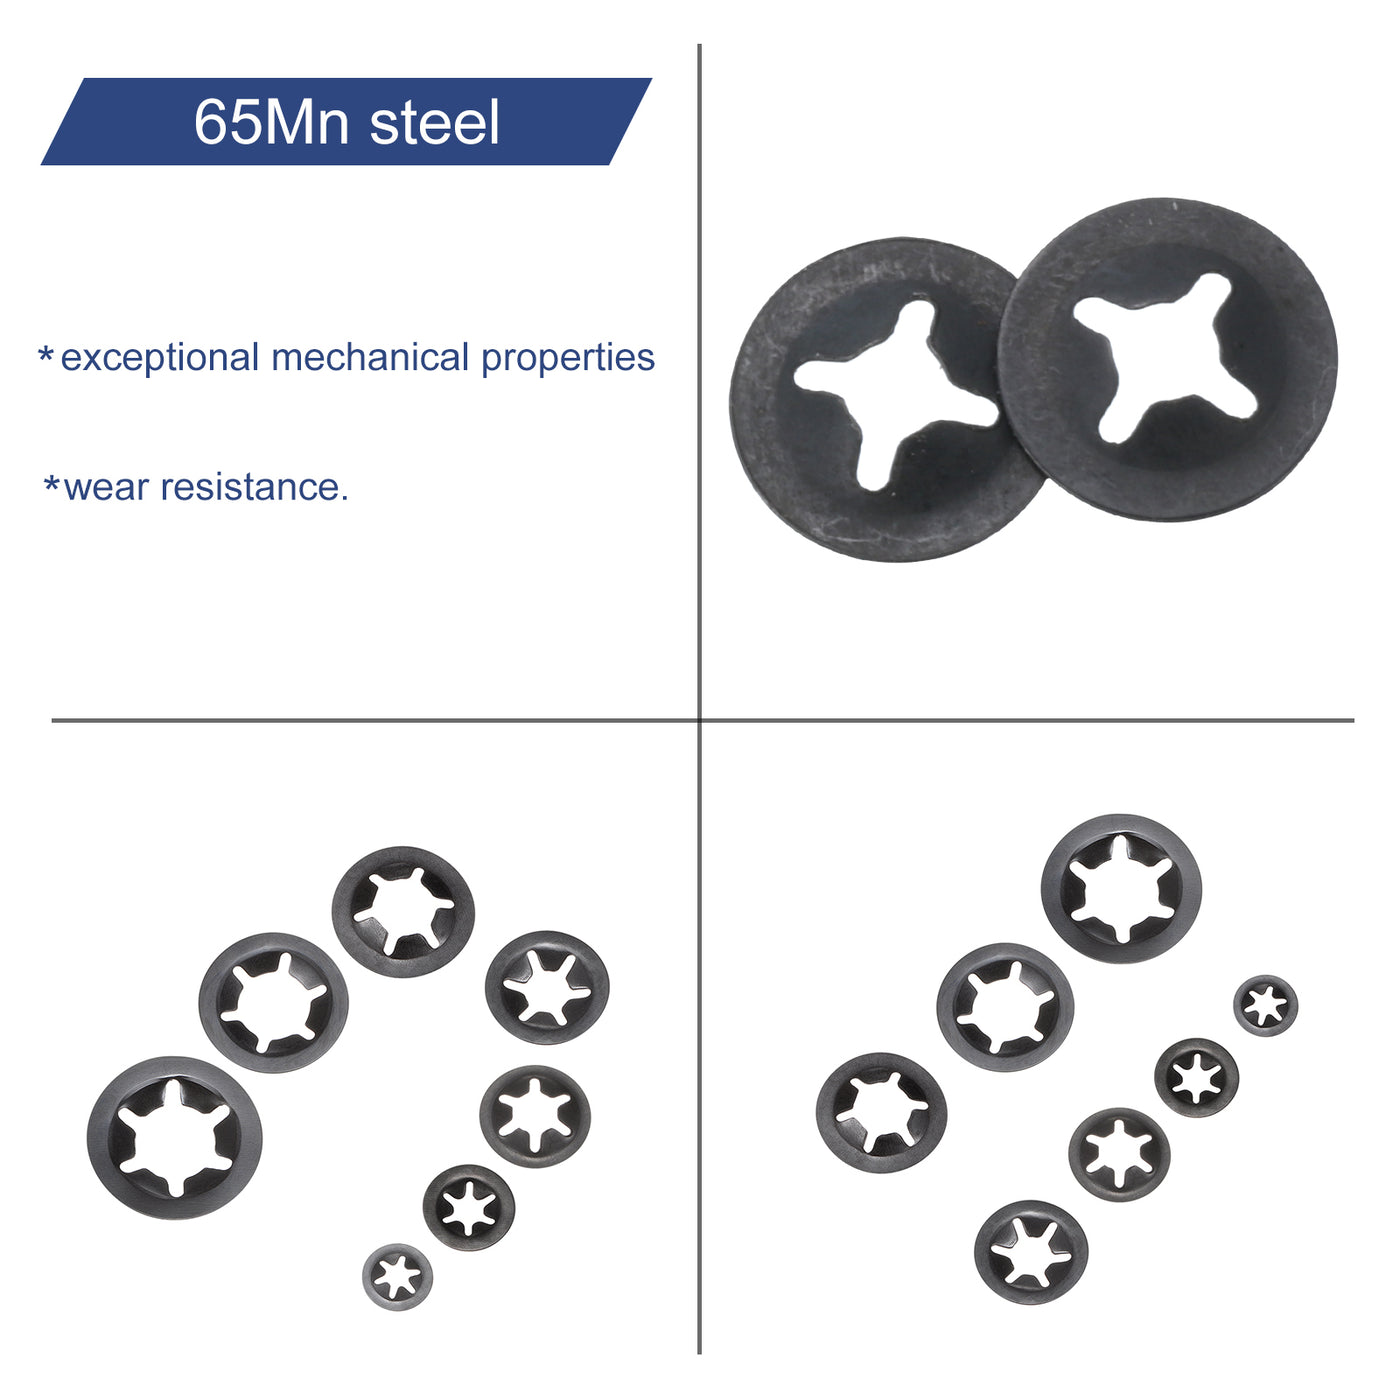 uxcell Uxcell 200pcs Internal Tooth Star Lock Washers M2 Push on Retaining Clips Quick Speed Locking Washers, 65Mn Steel Starlock Push Nuts